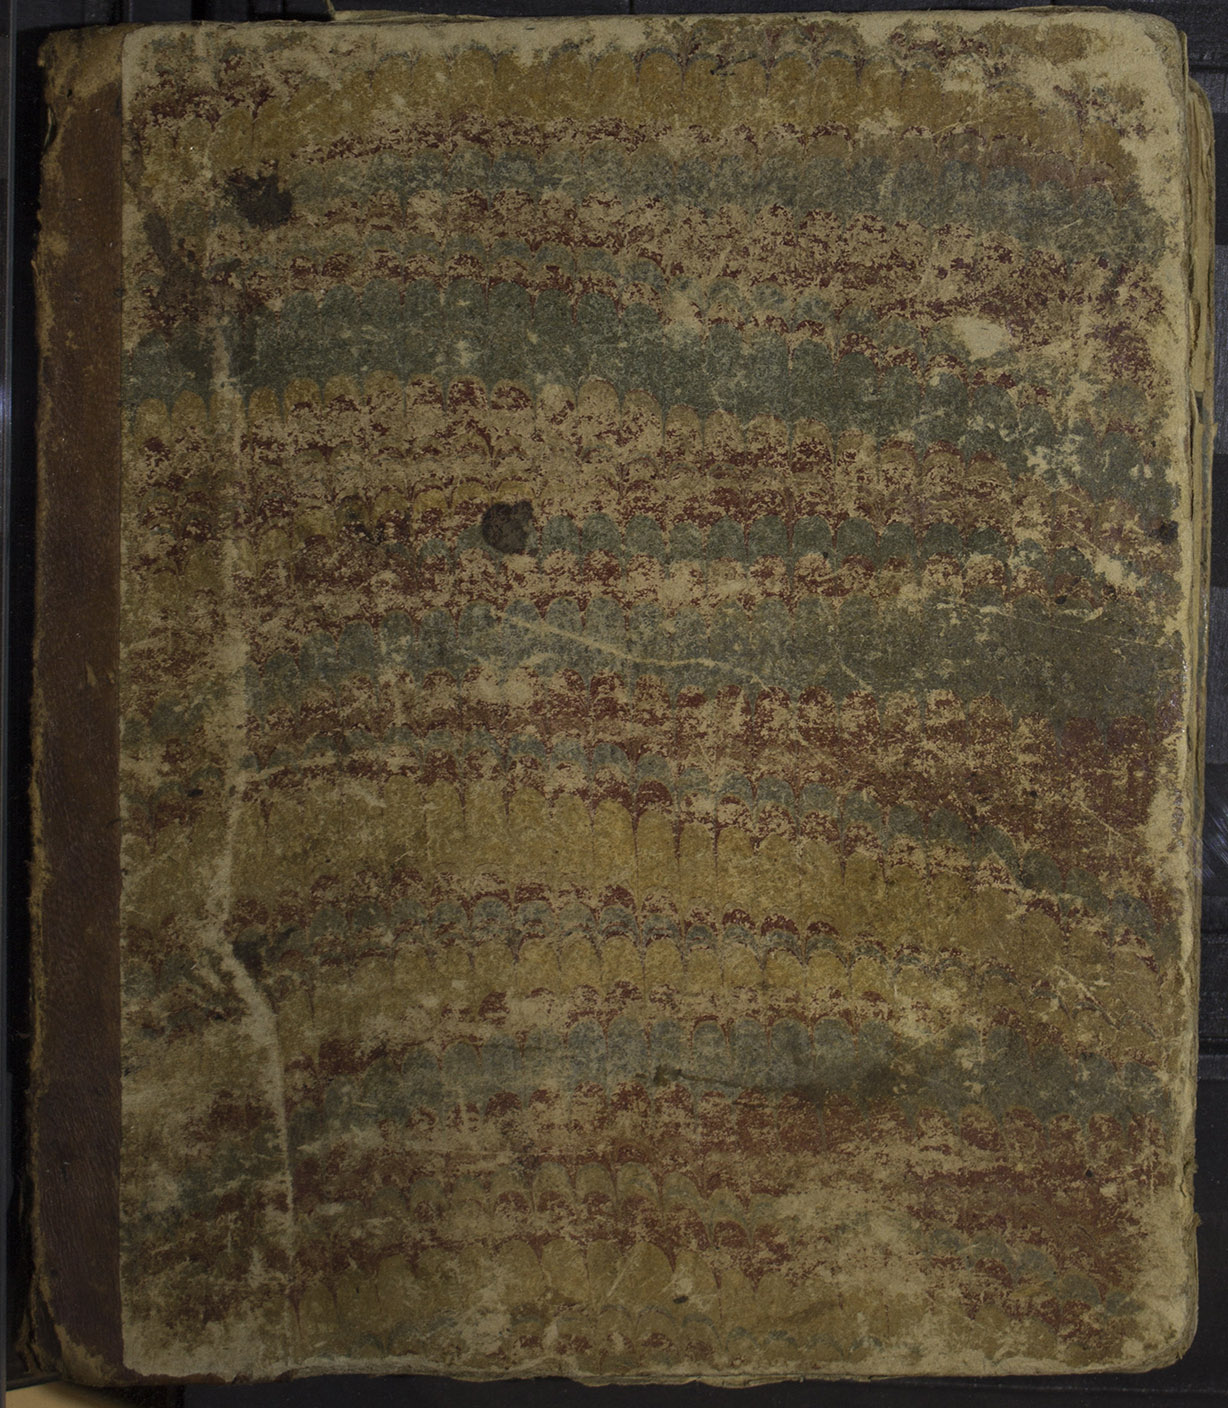 Depiction of Front cover of the Maynard volume